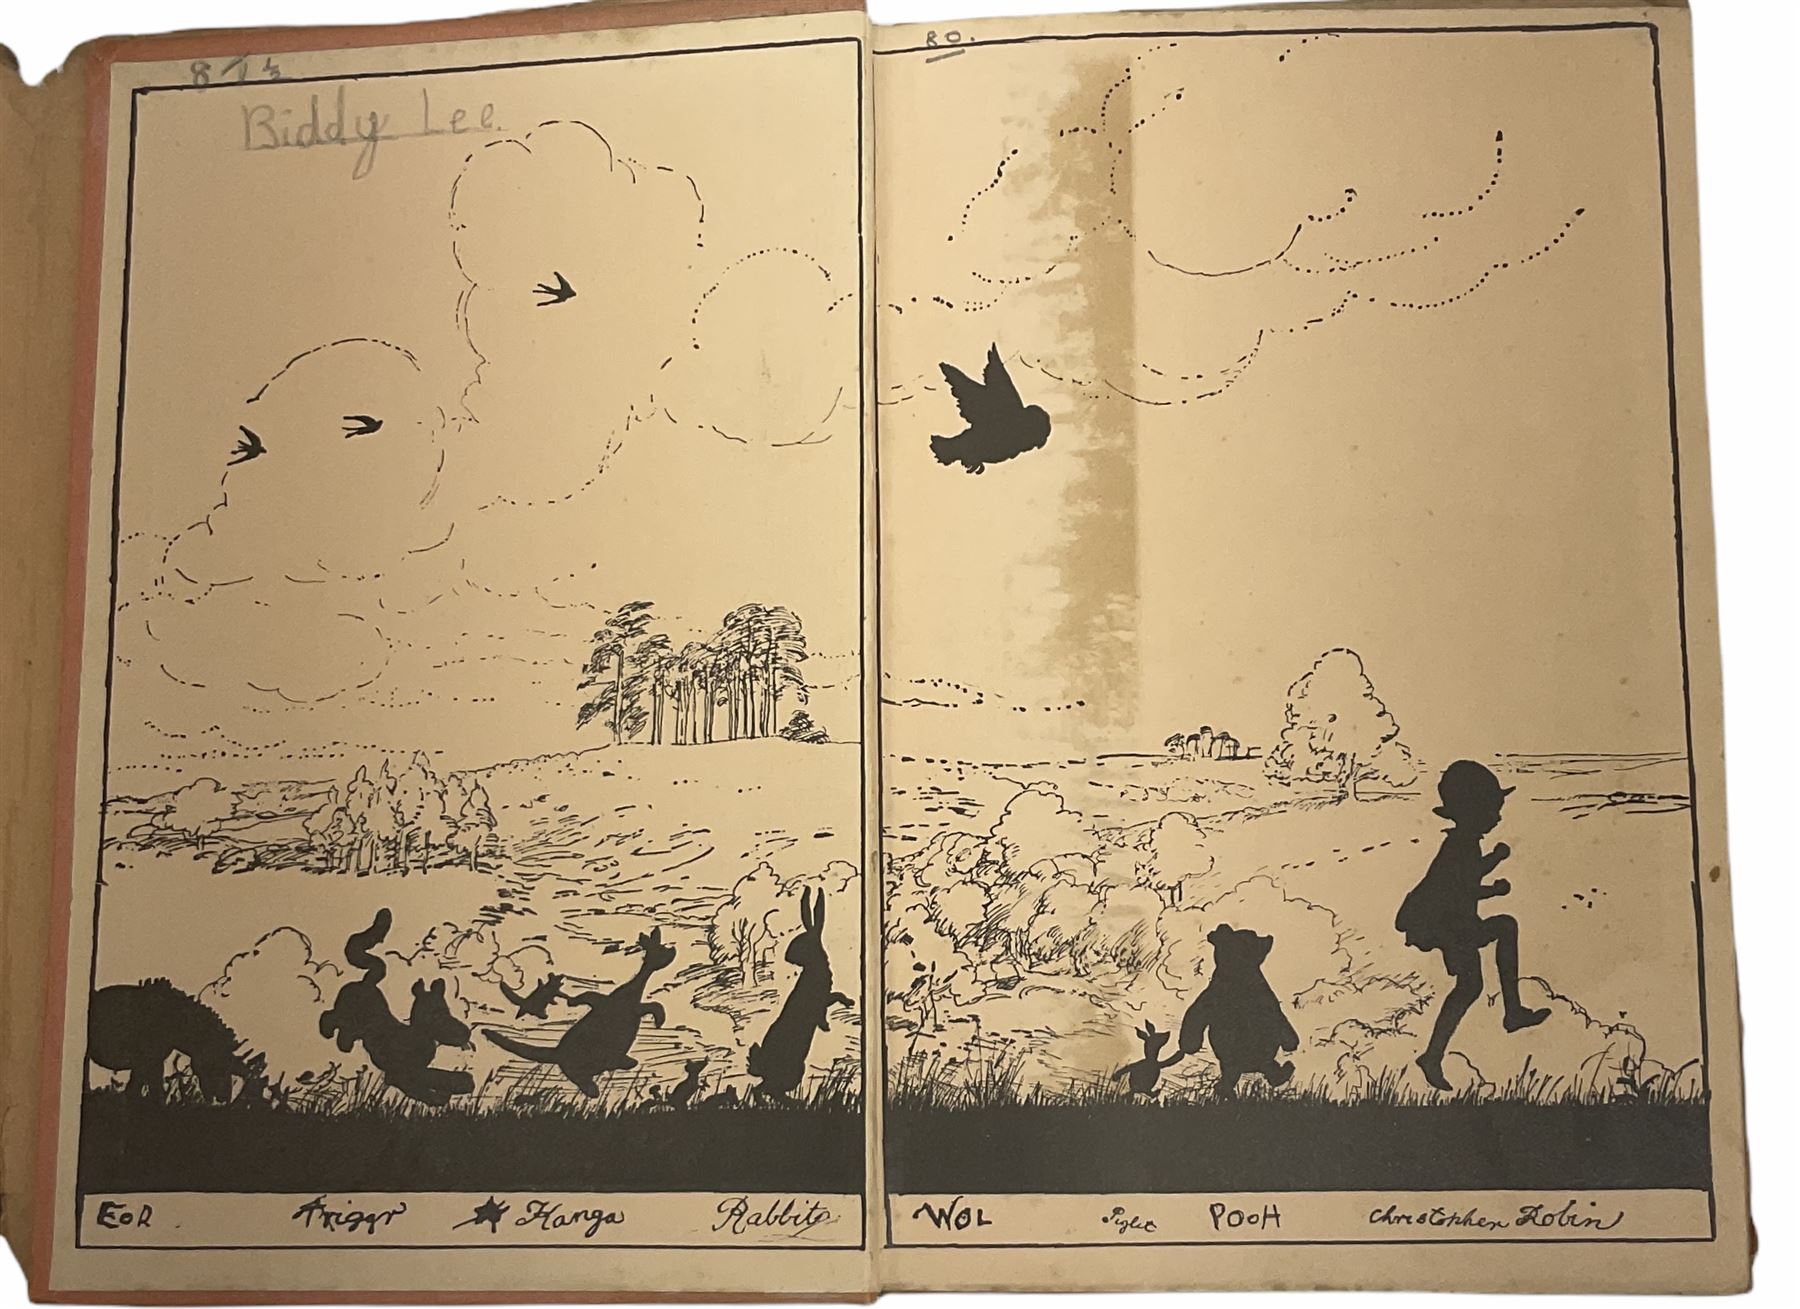 Five A.A. Milne Winnie The Pooh books illustrated by E.H. Shepard - The House at Pooh Corner. 1928. - Image 6 of 13